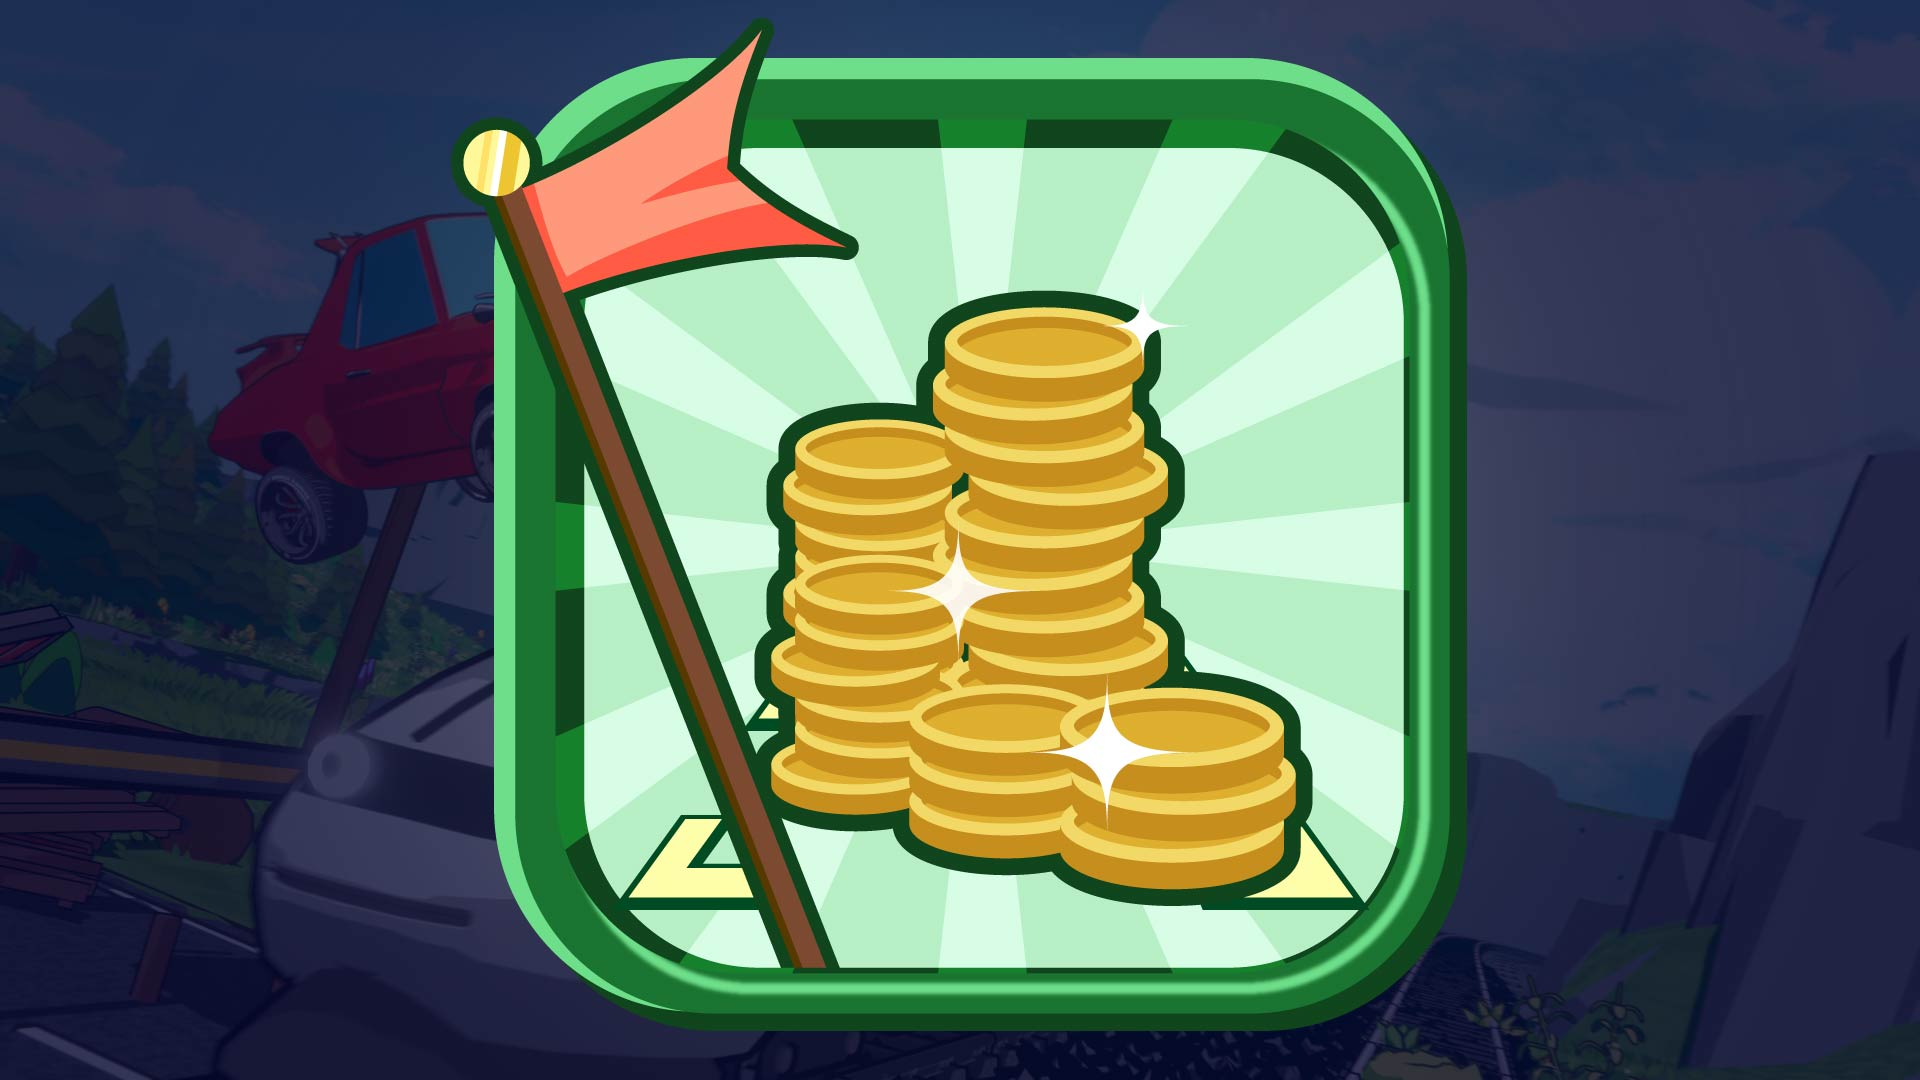 Icon for Combo expert